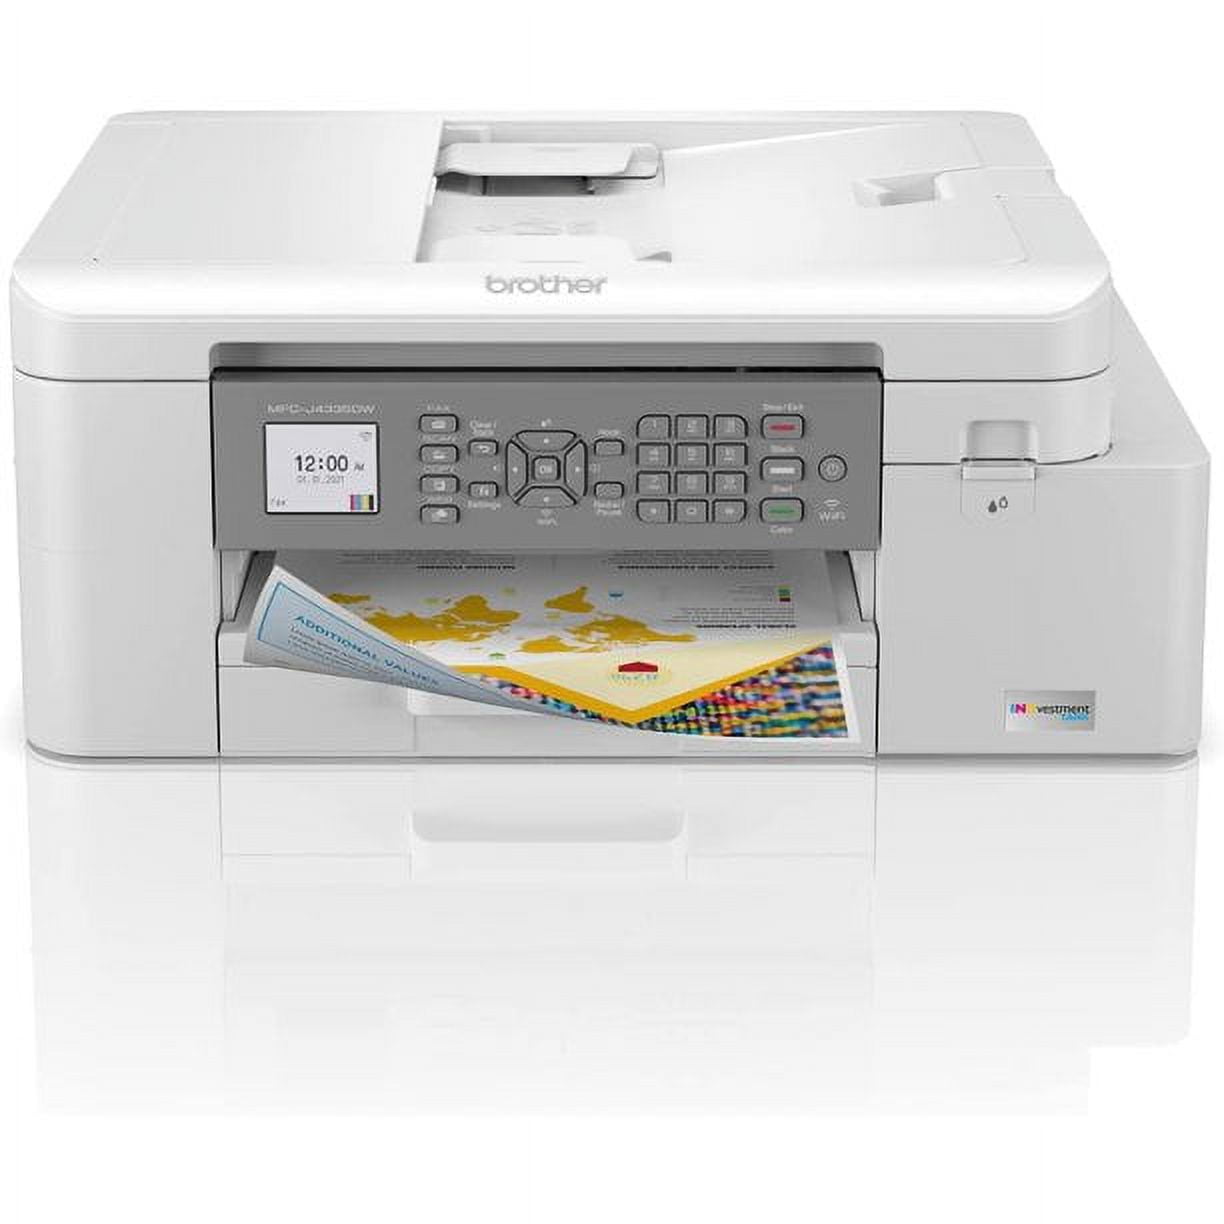 Brother MFC-L8610CDW Review